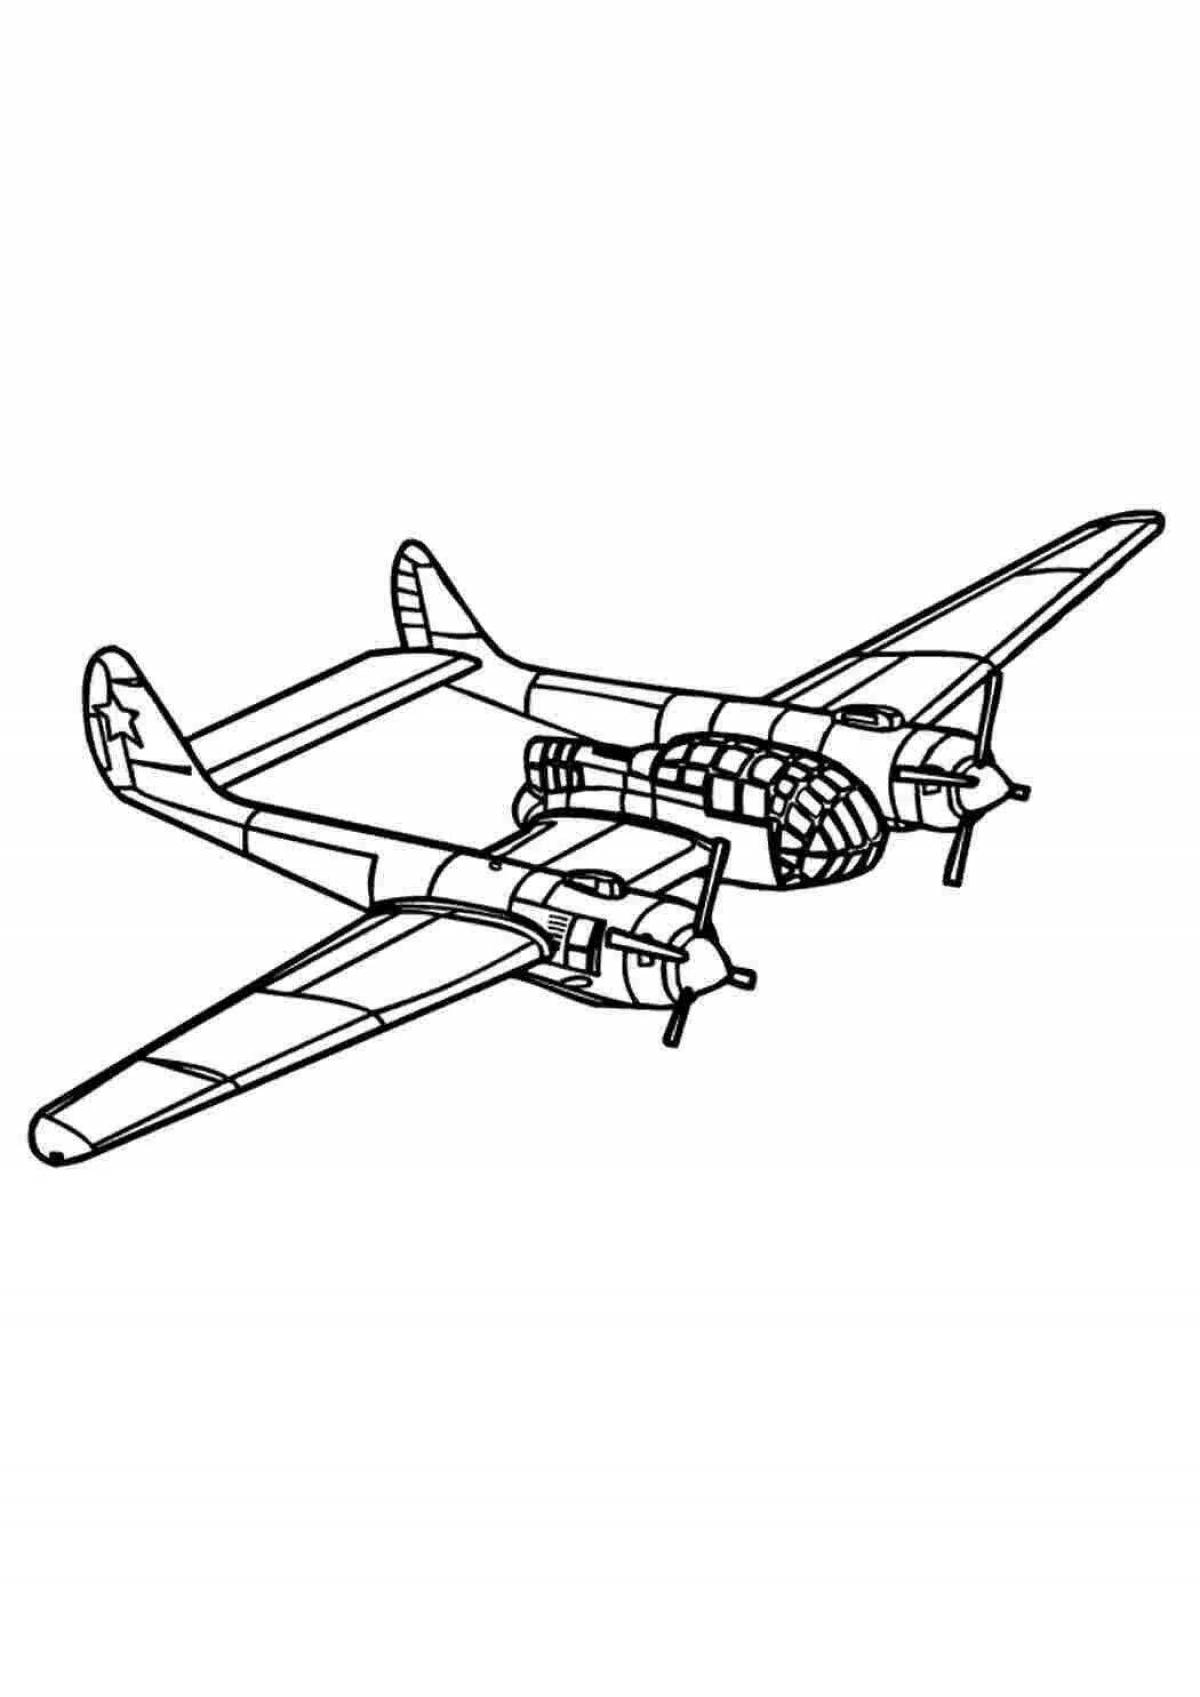 Fabulous silt 2 aircraft coloring page